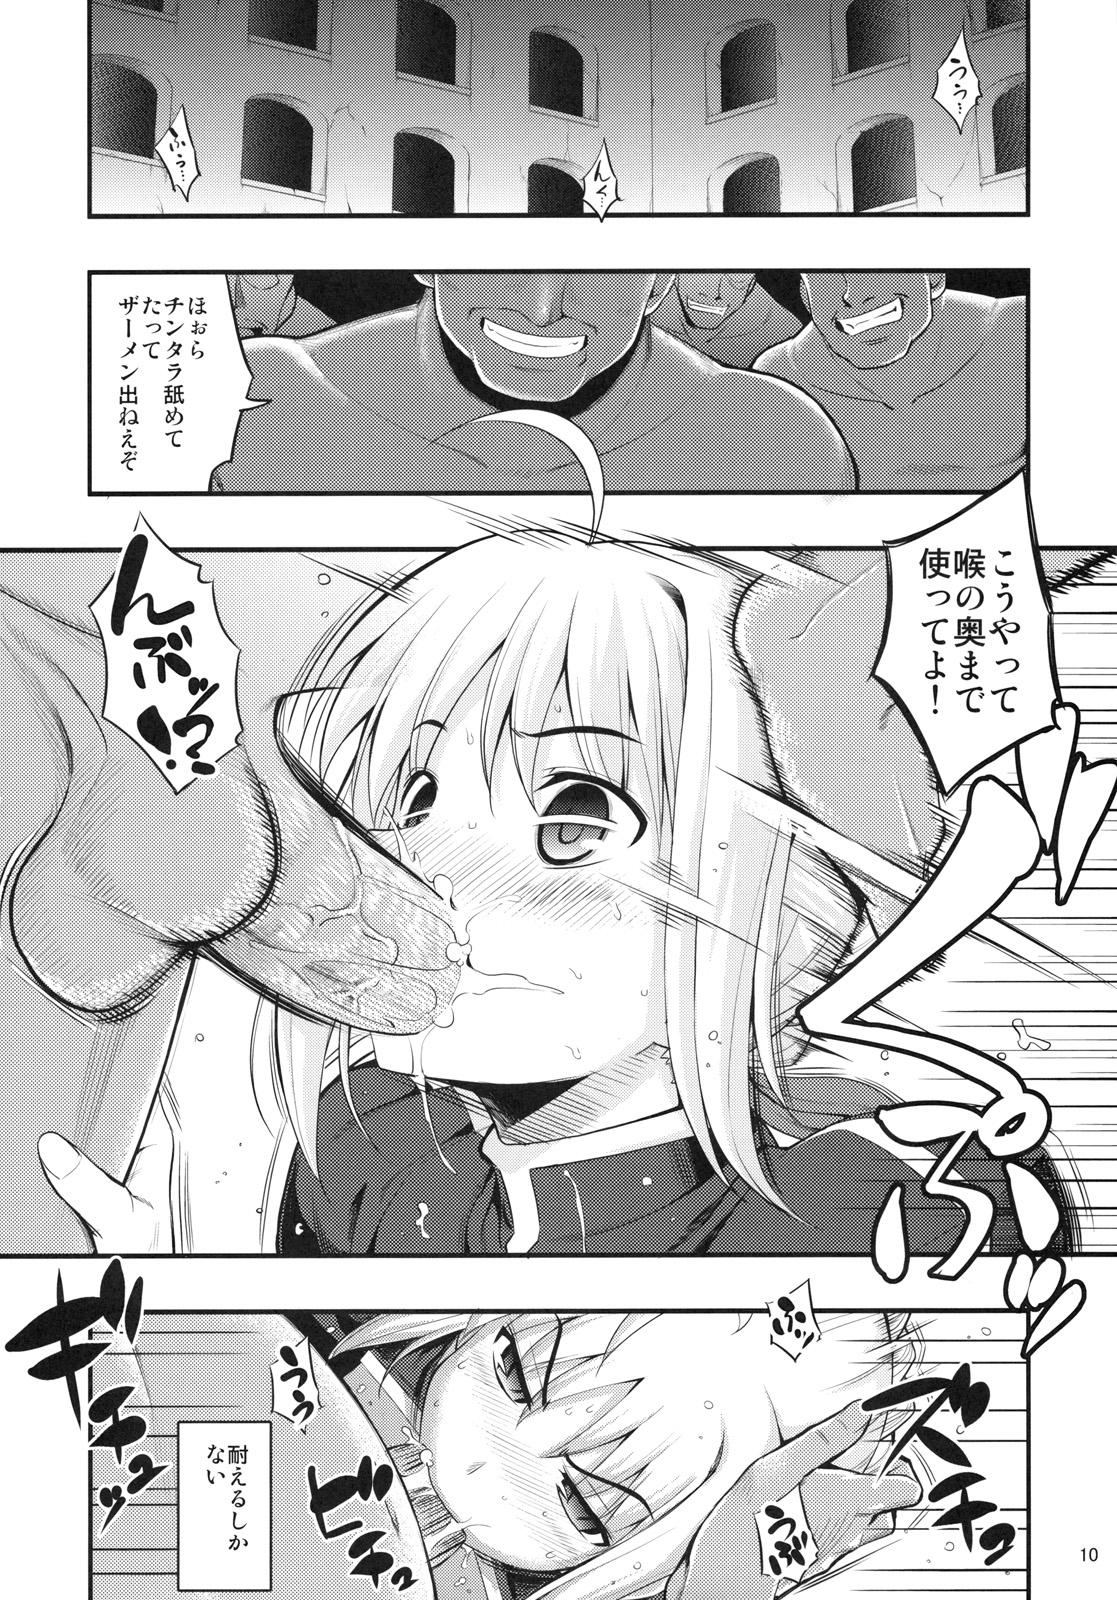 Hentai RE12 - Fate stay night Milk - Page 9